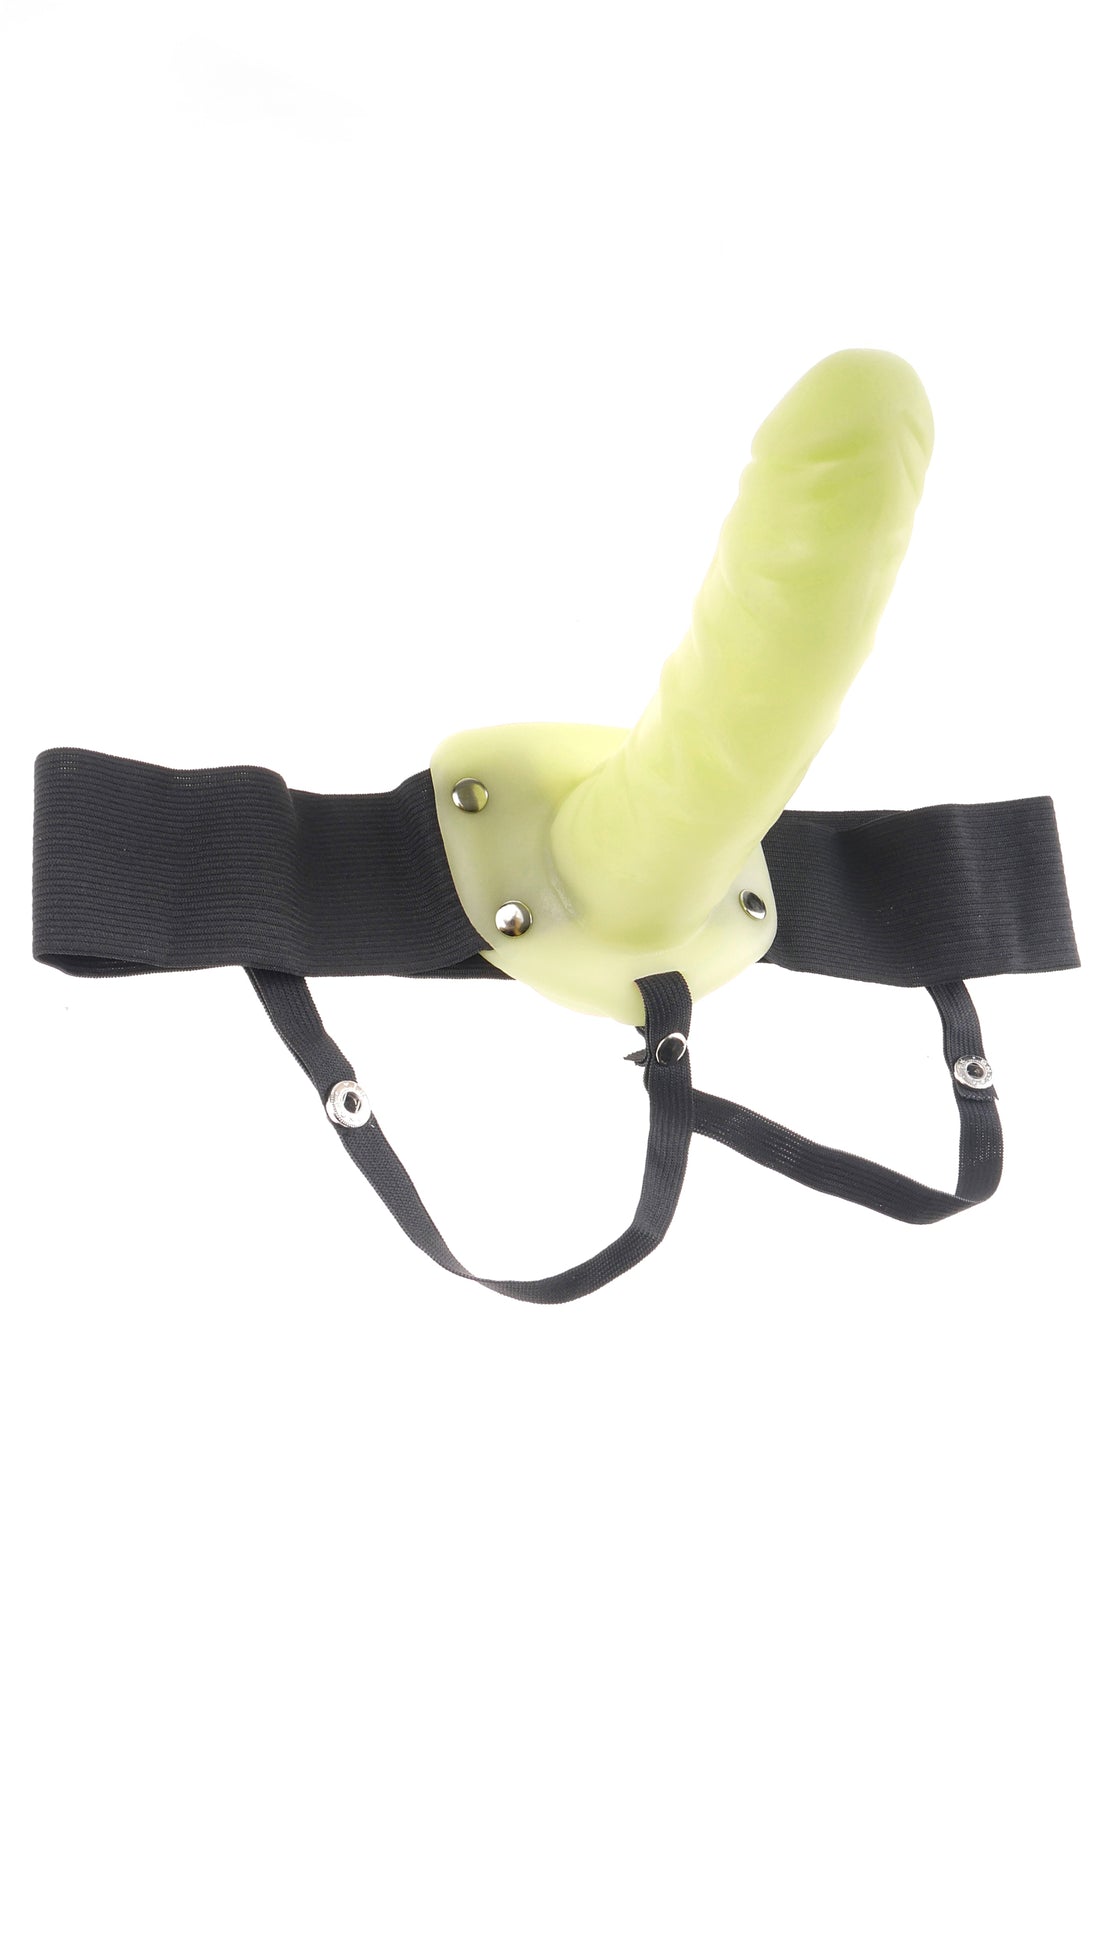 Fetish Fantasy Series for Him or Her Hollow Strap-on - Glow in the Dark PD3366-32